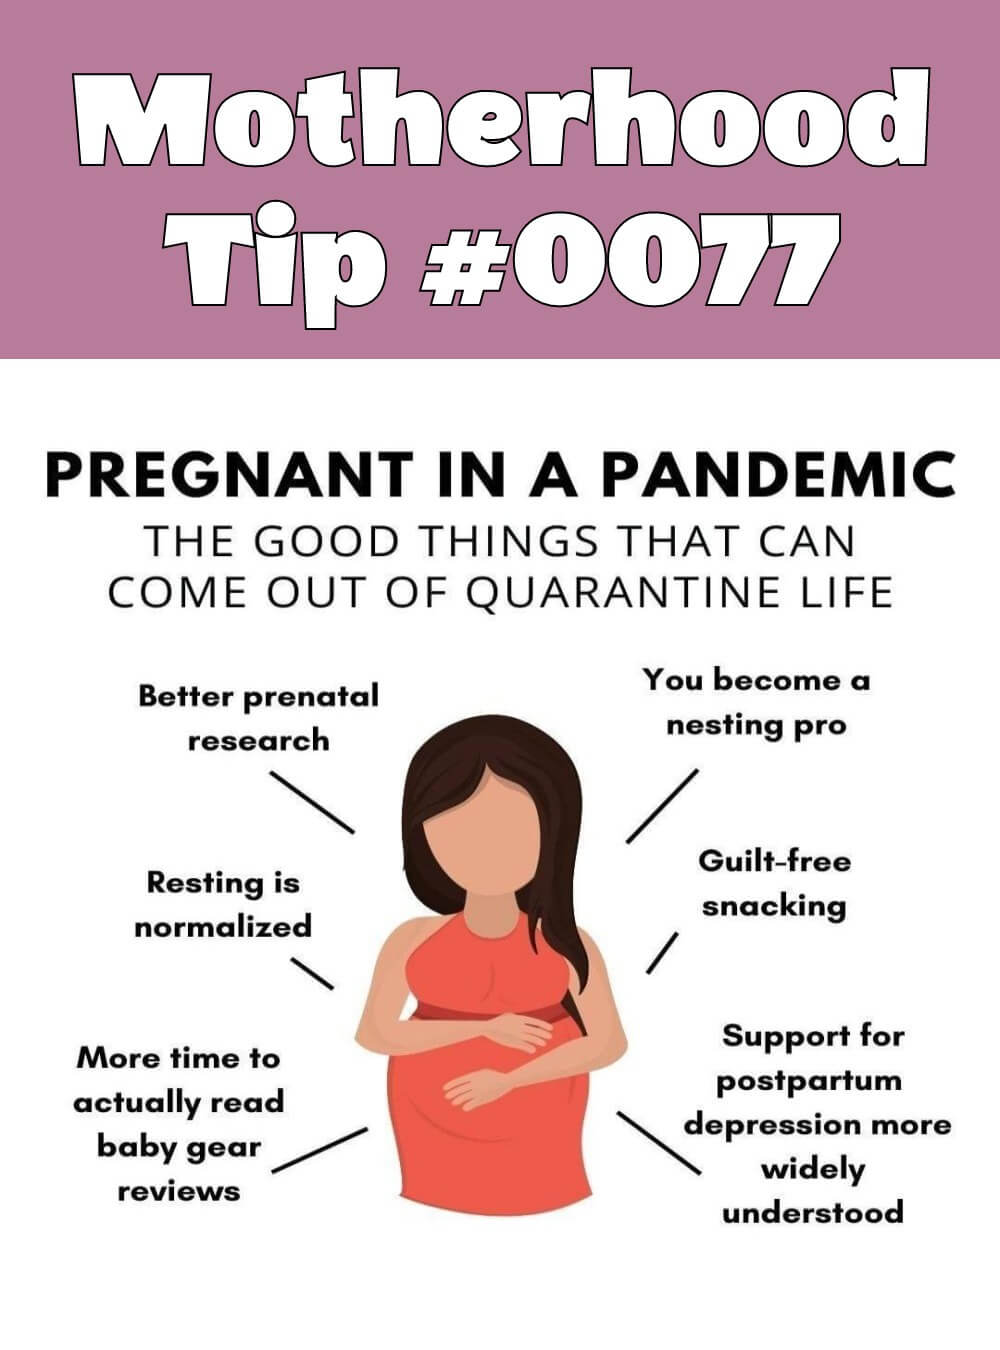 Parenting and Pregnancy Infographic | Motherhood Tip #0077